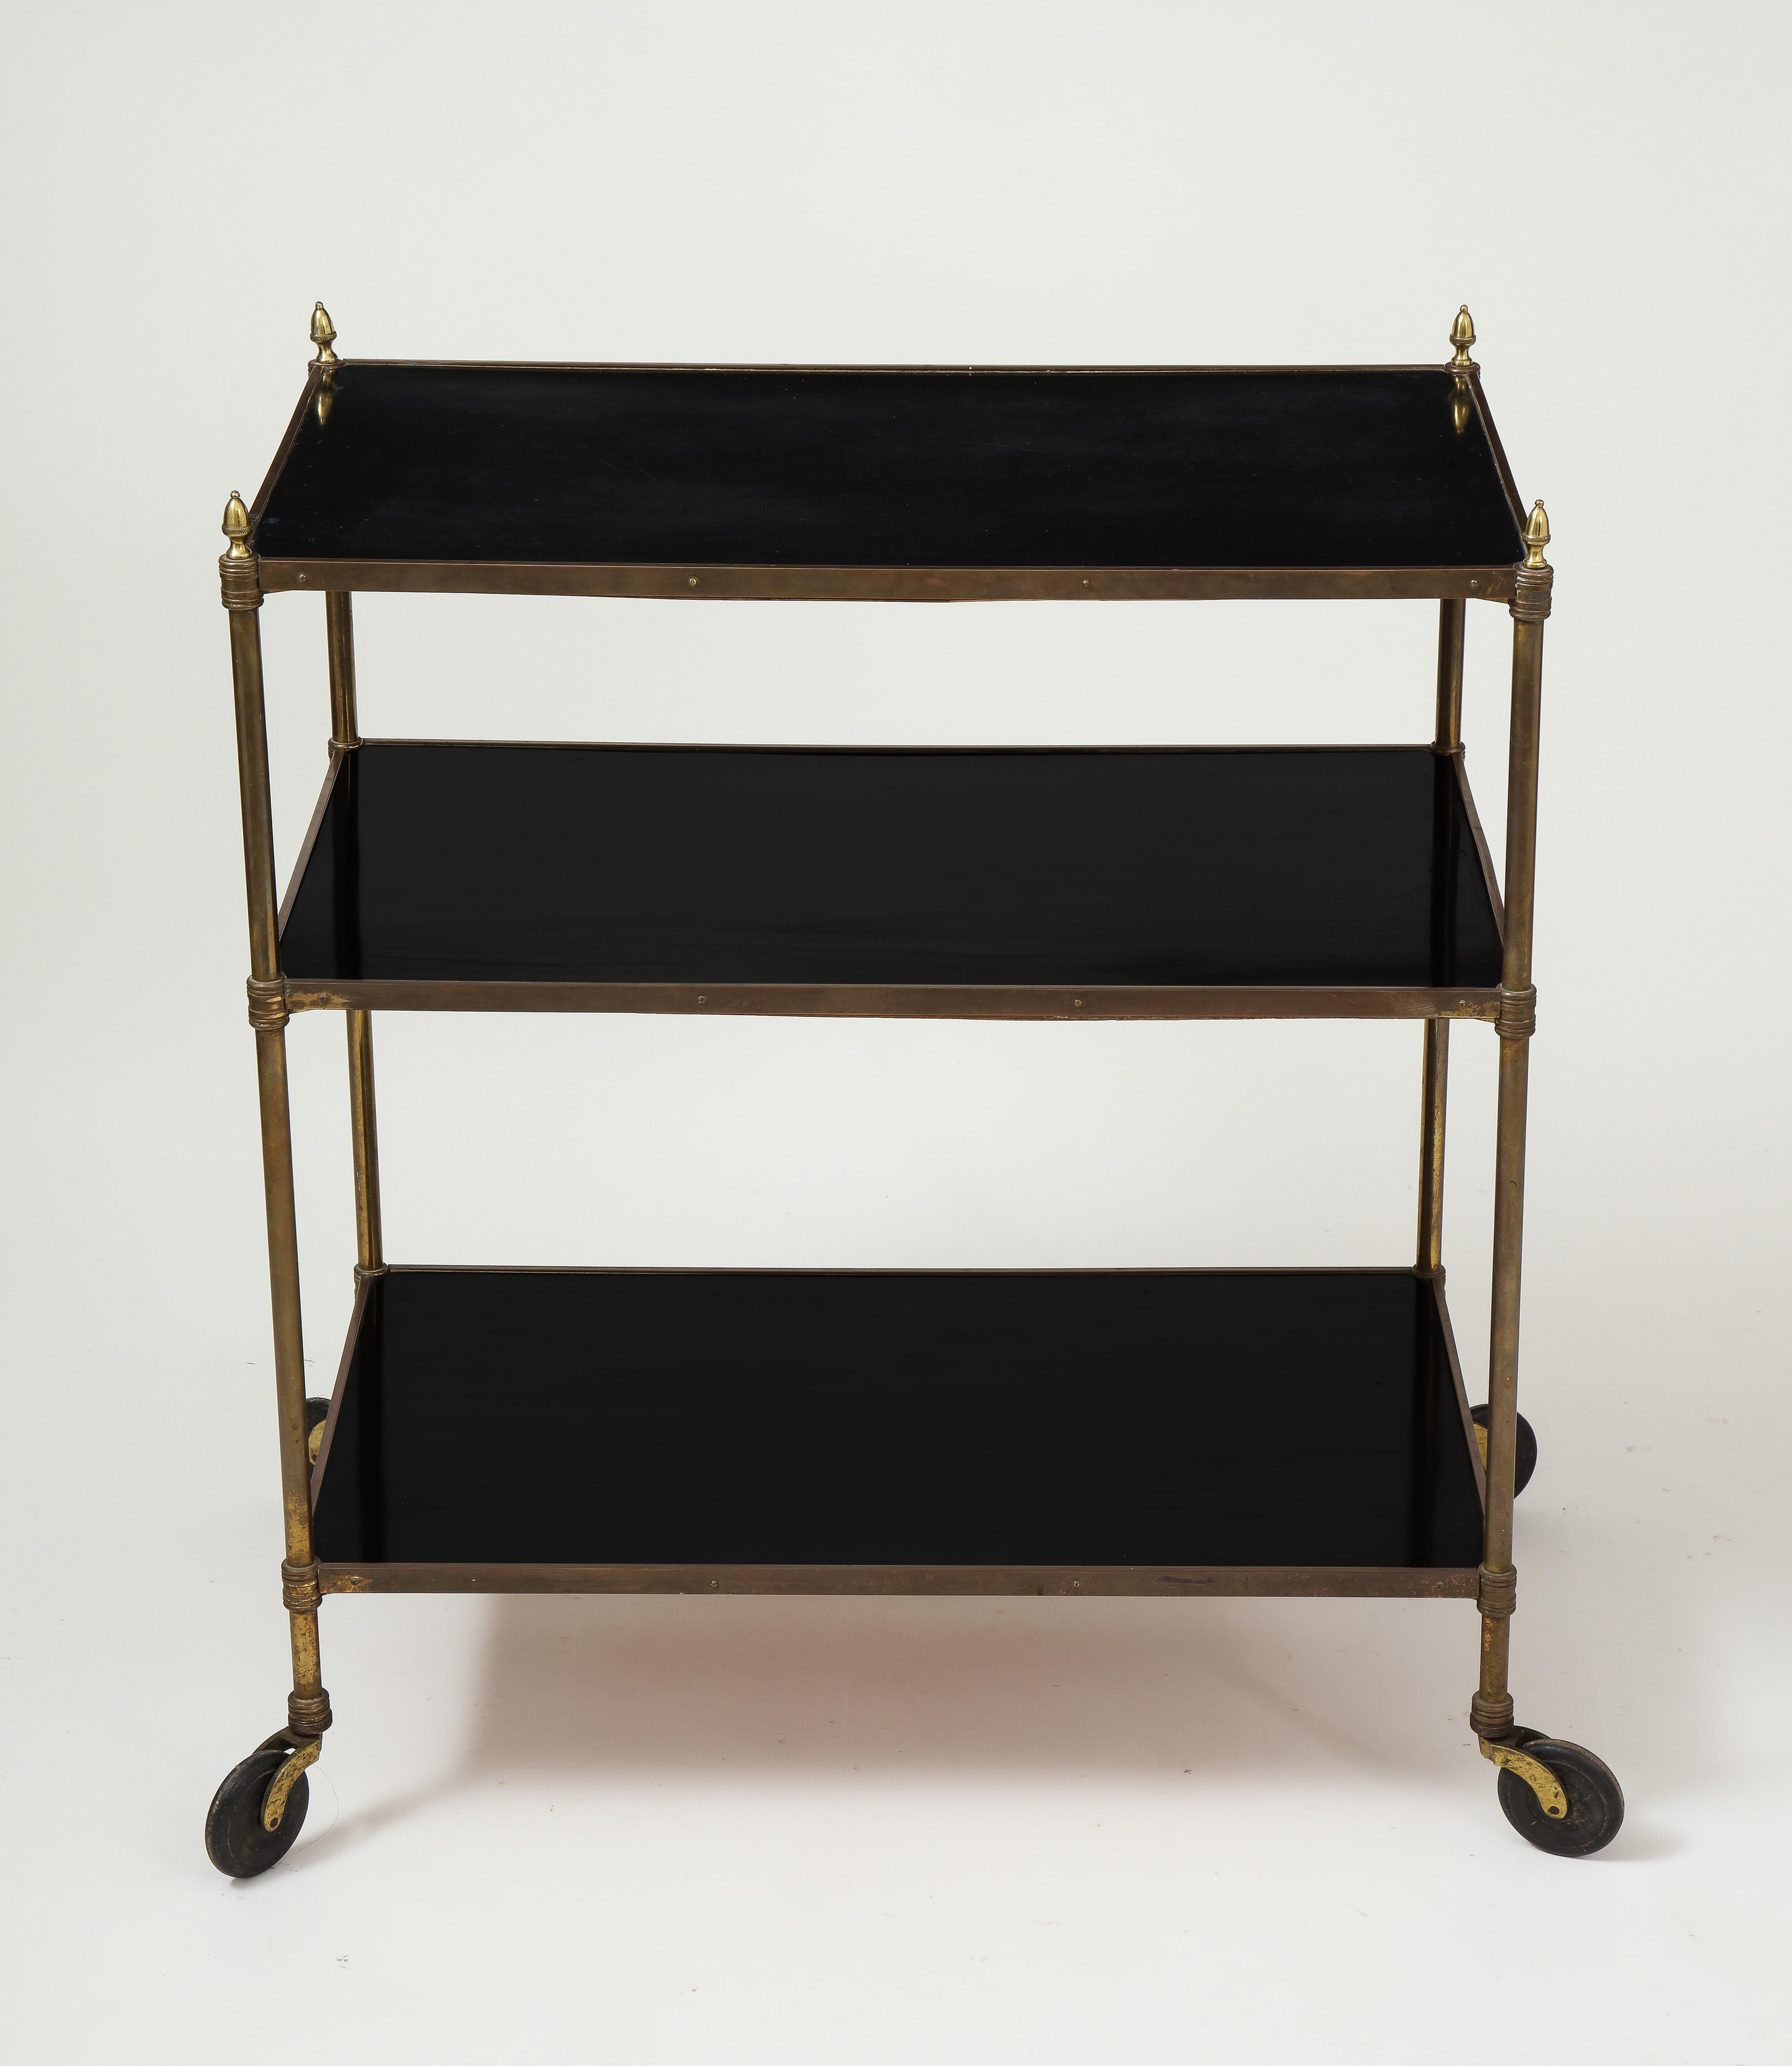 With three rectangular ebonized wood shelves set within gold-lacquered brass supports, the corners surmounted by cone-shaped finials; on wheels.